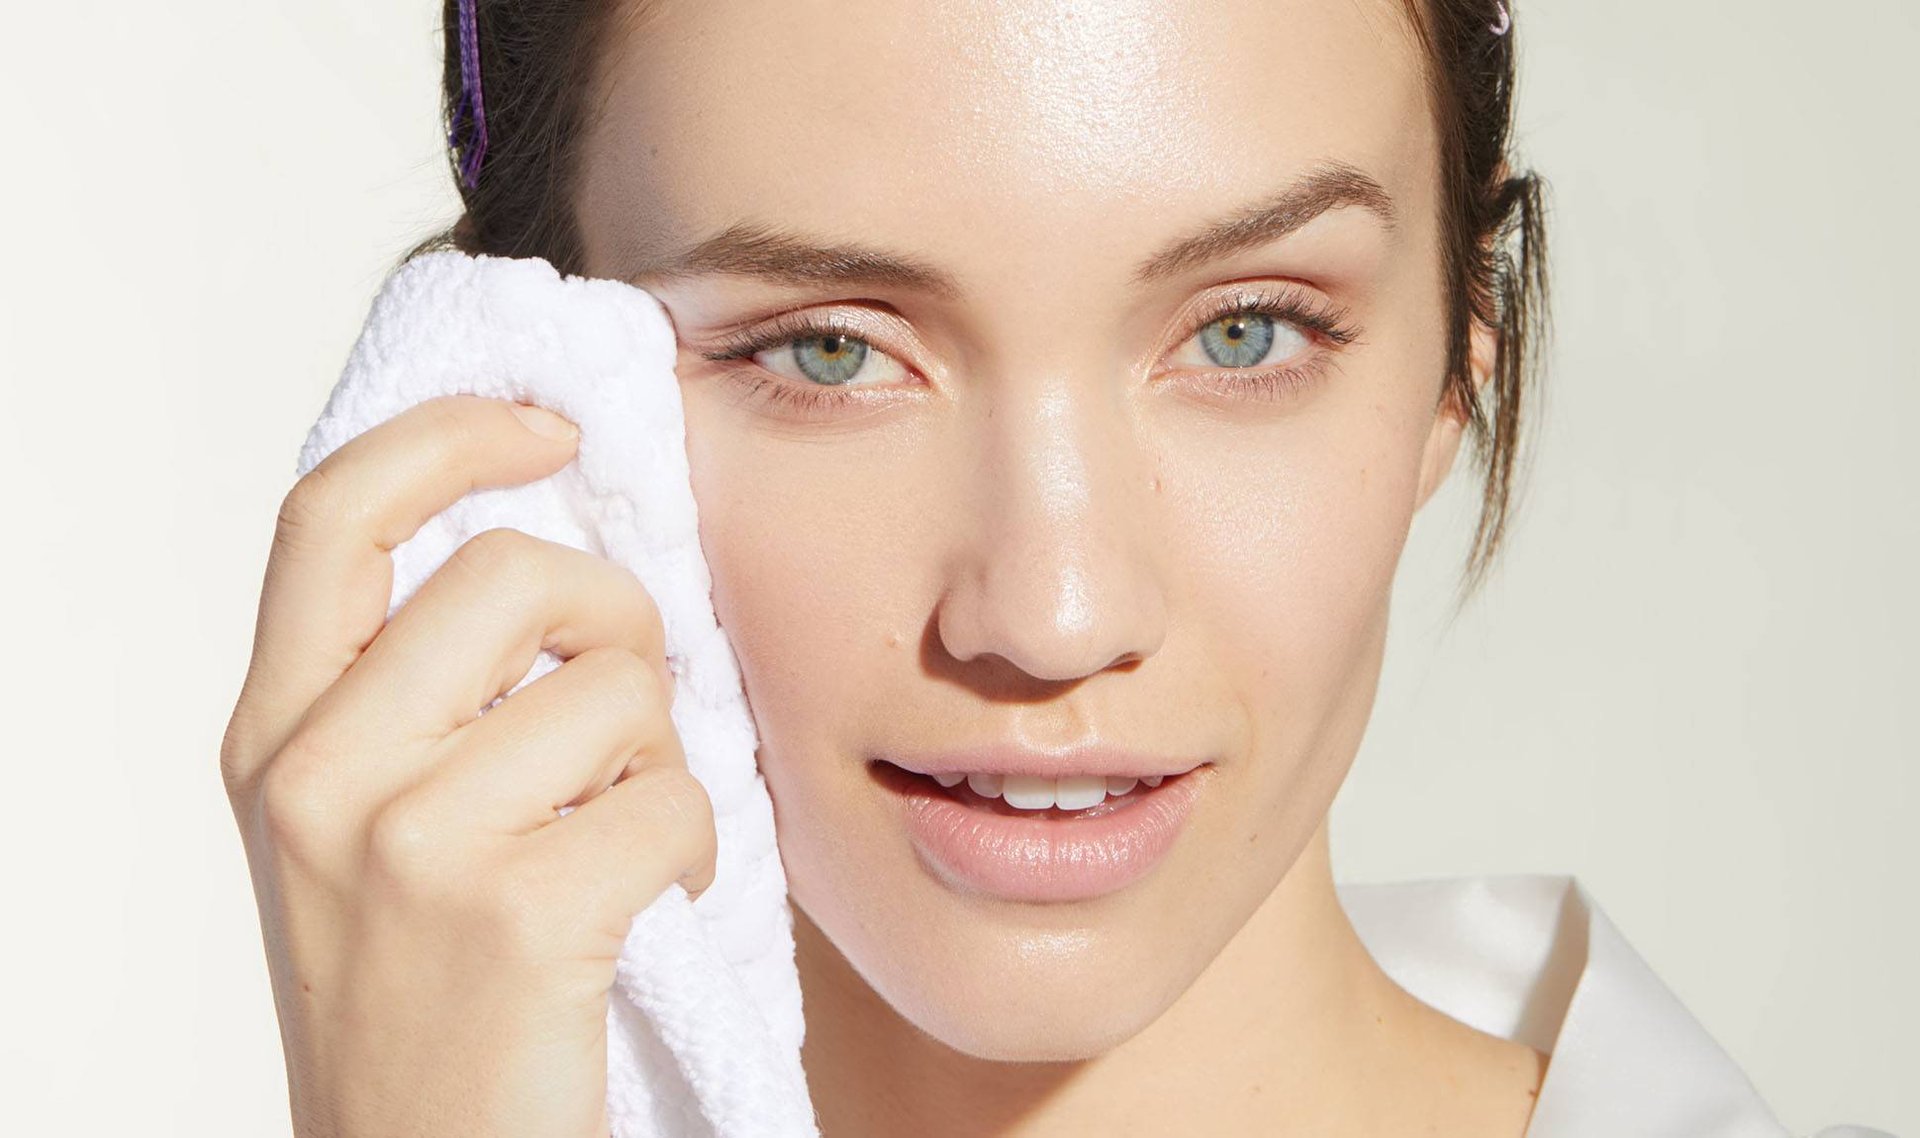 How to Wash Your Face, According to Dermatologists